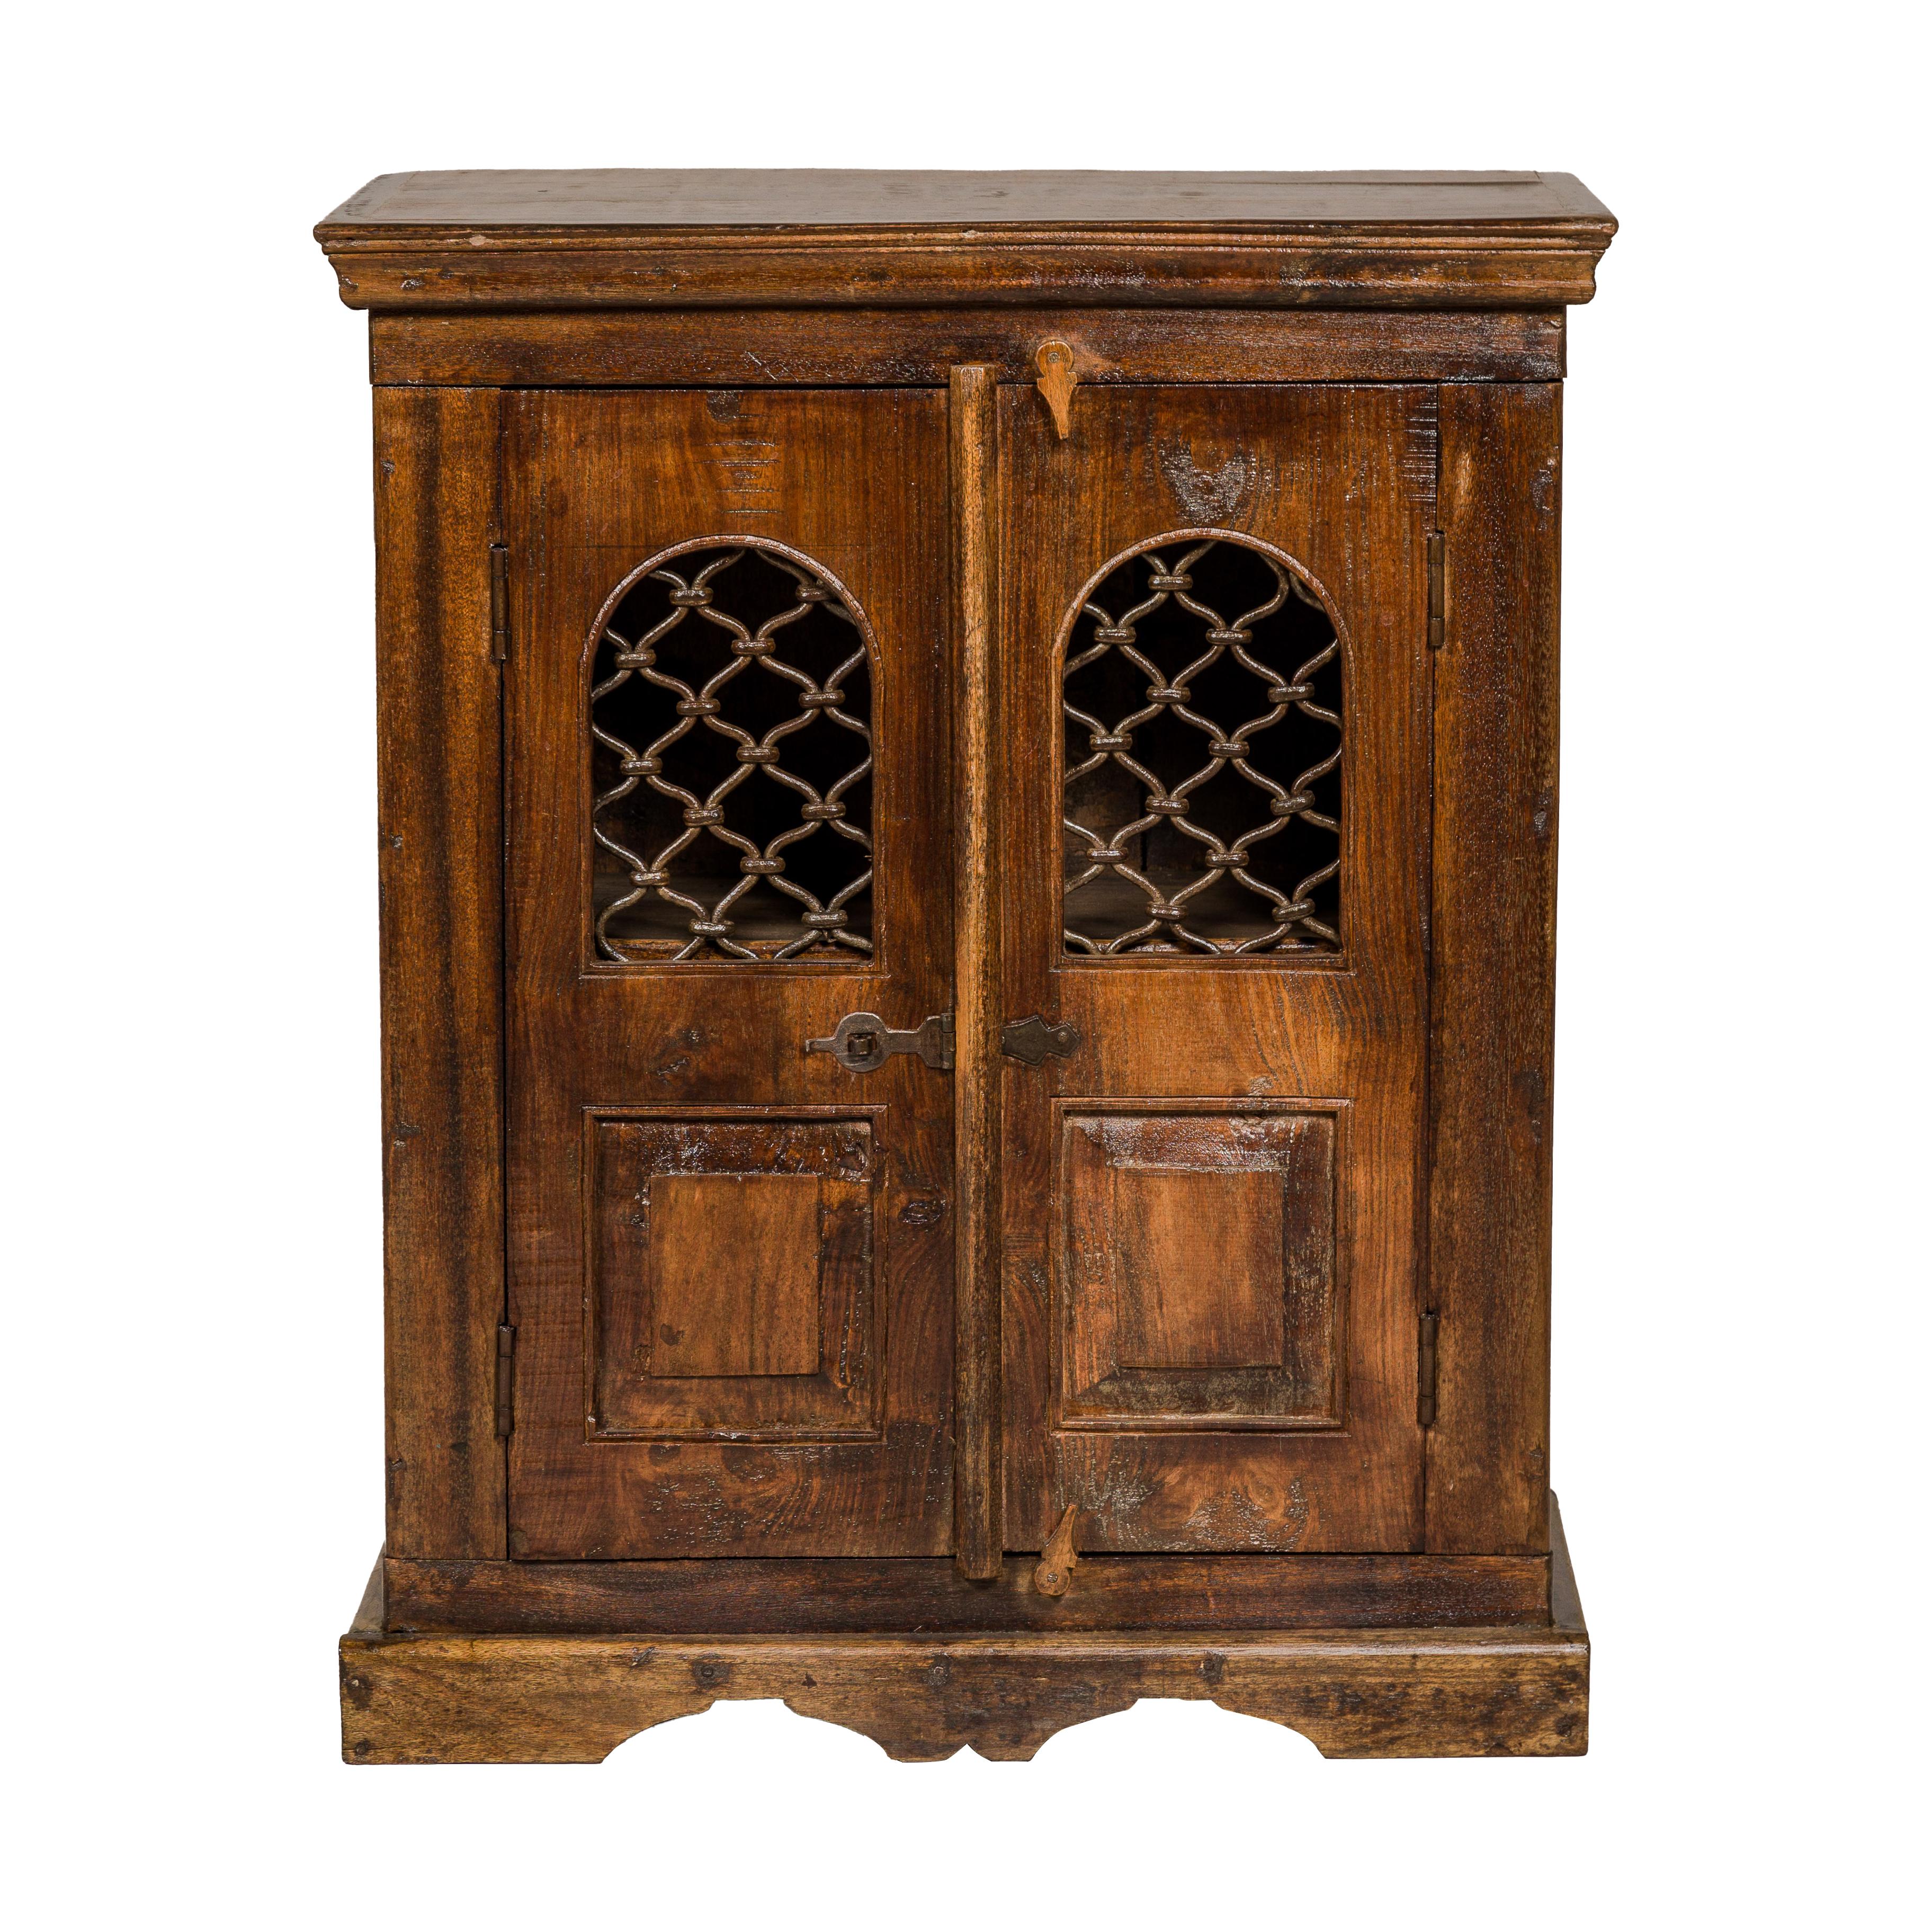 Indian 19th Century Wooden Side Cabinet with Arched Metal Grate Window Door For Sale 15